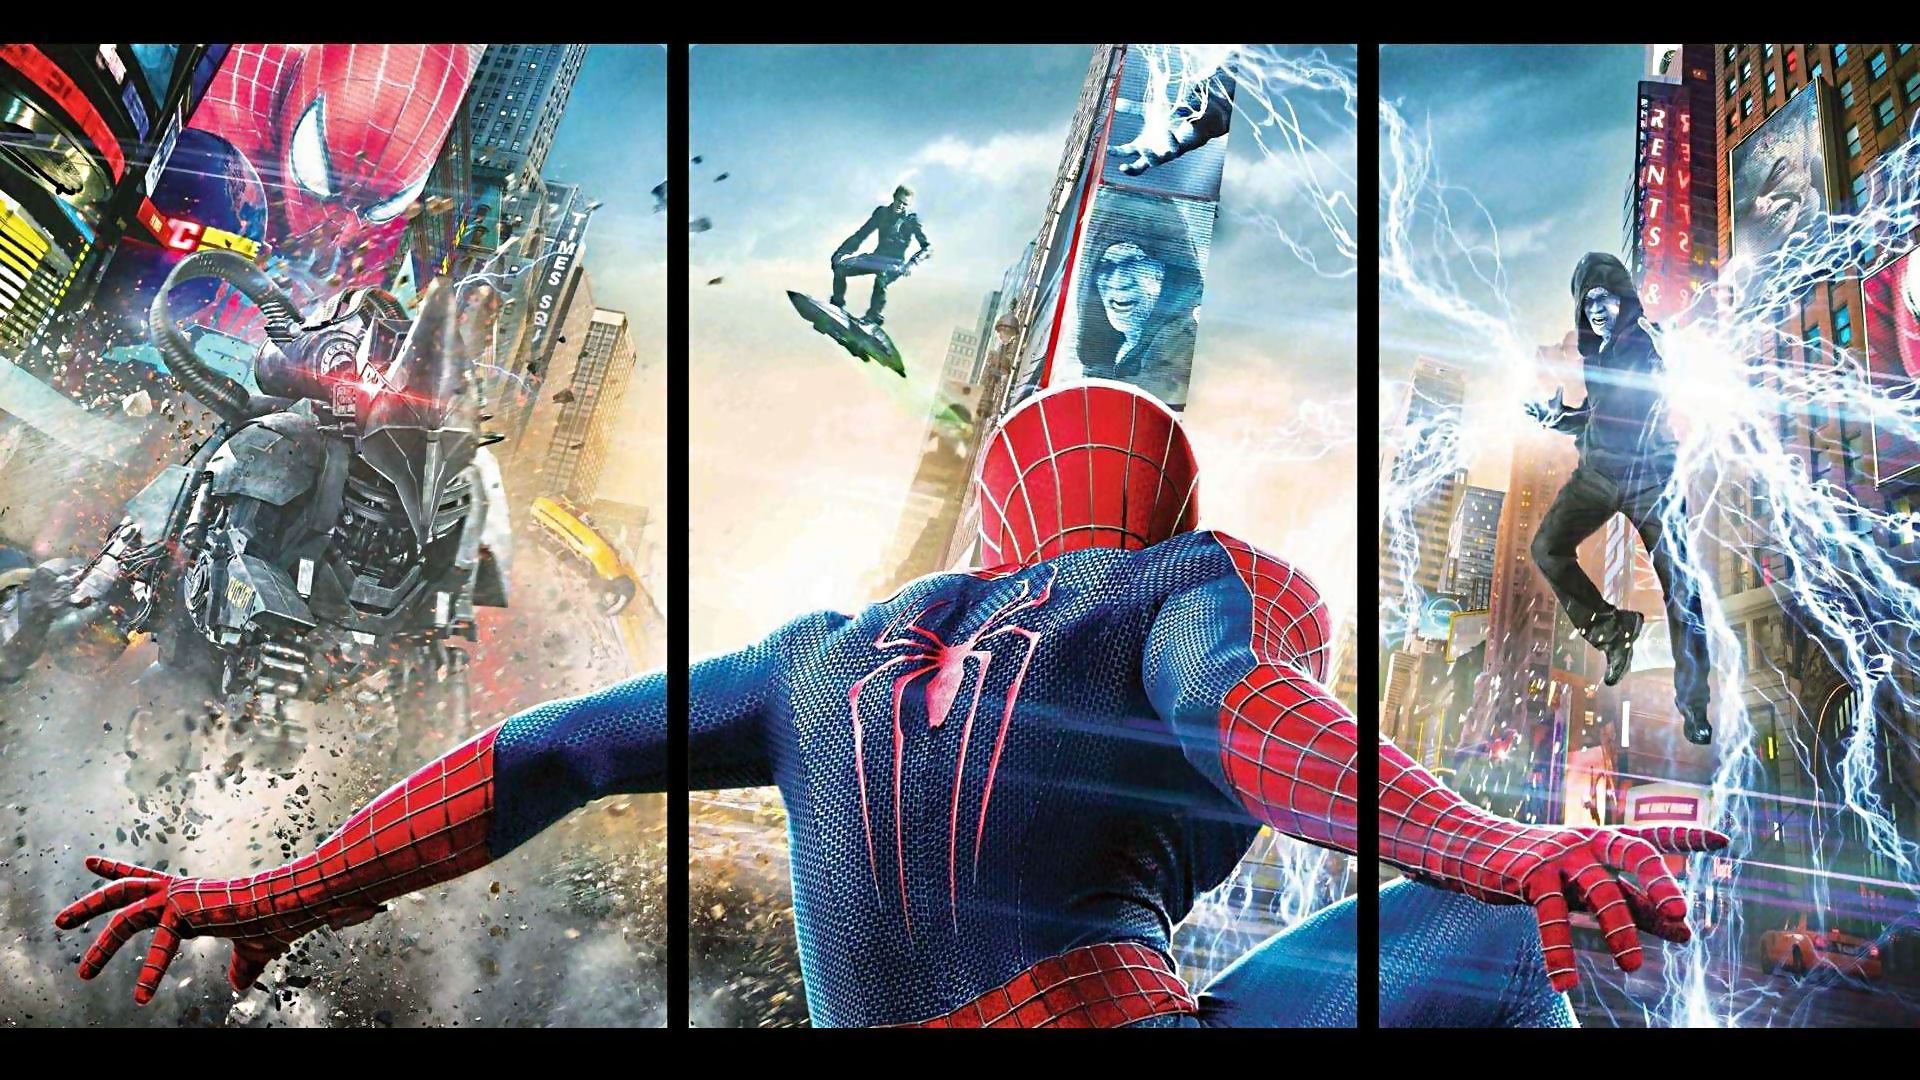 DeviantArt: More Like The Amazing Spider-Man 2 Movie Poster ...